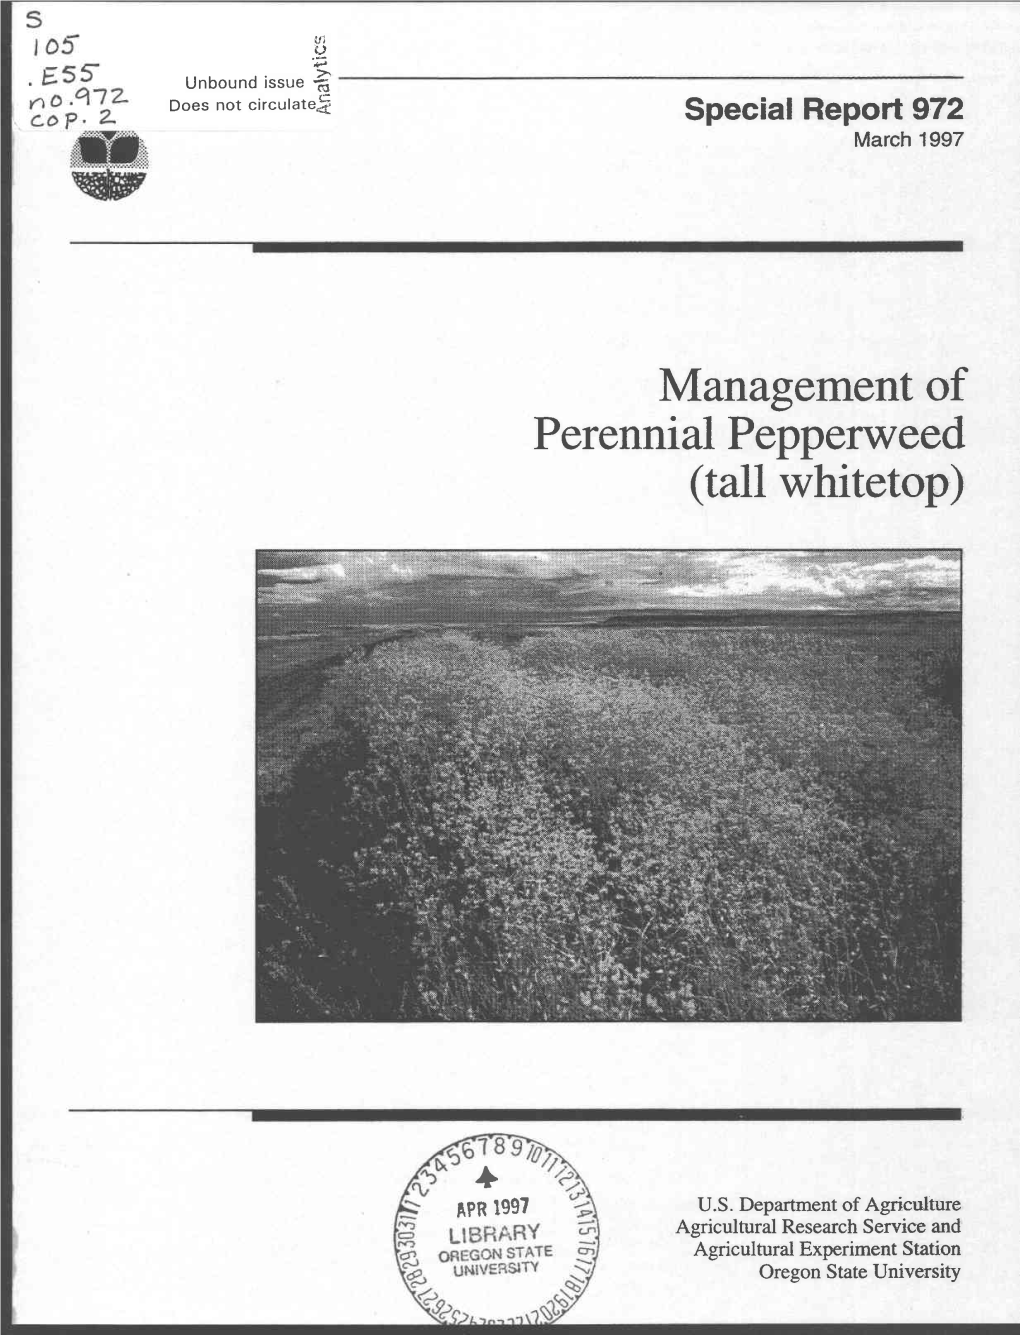 Management of Perennial Pepperweed (Tall Whitetop)